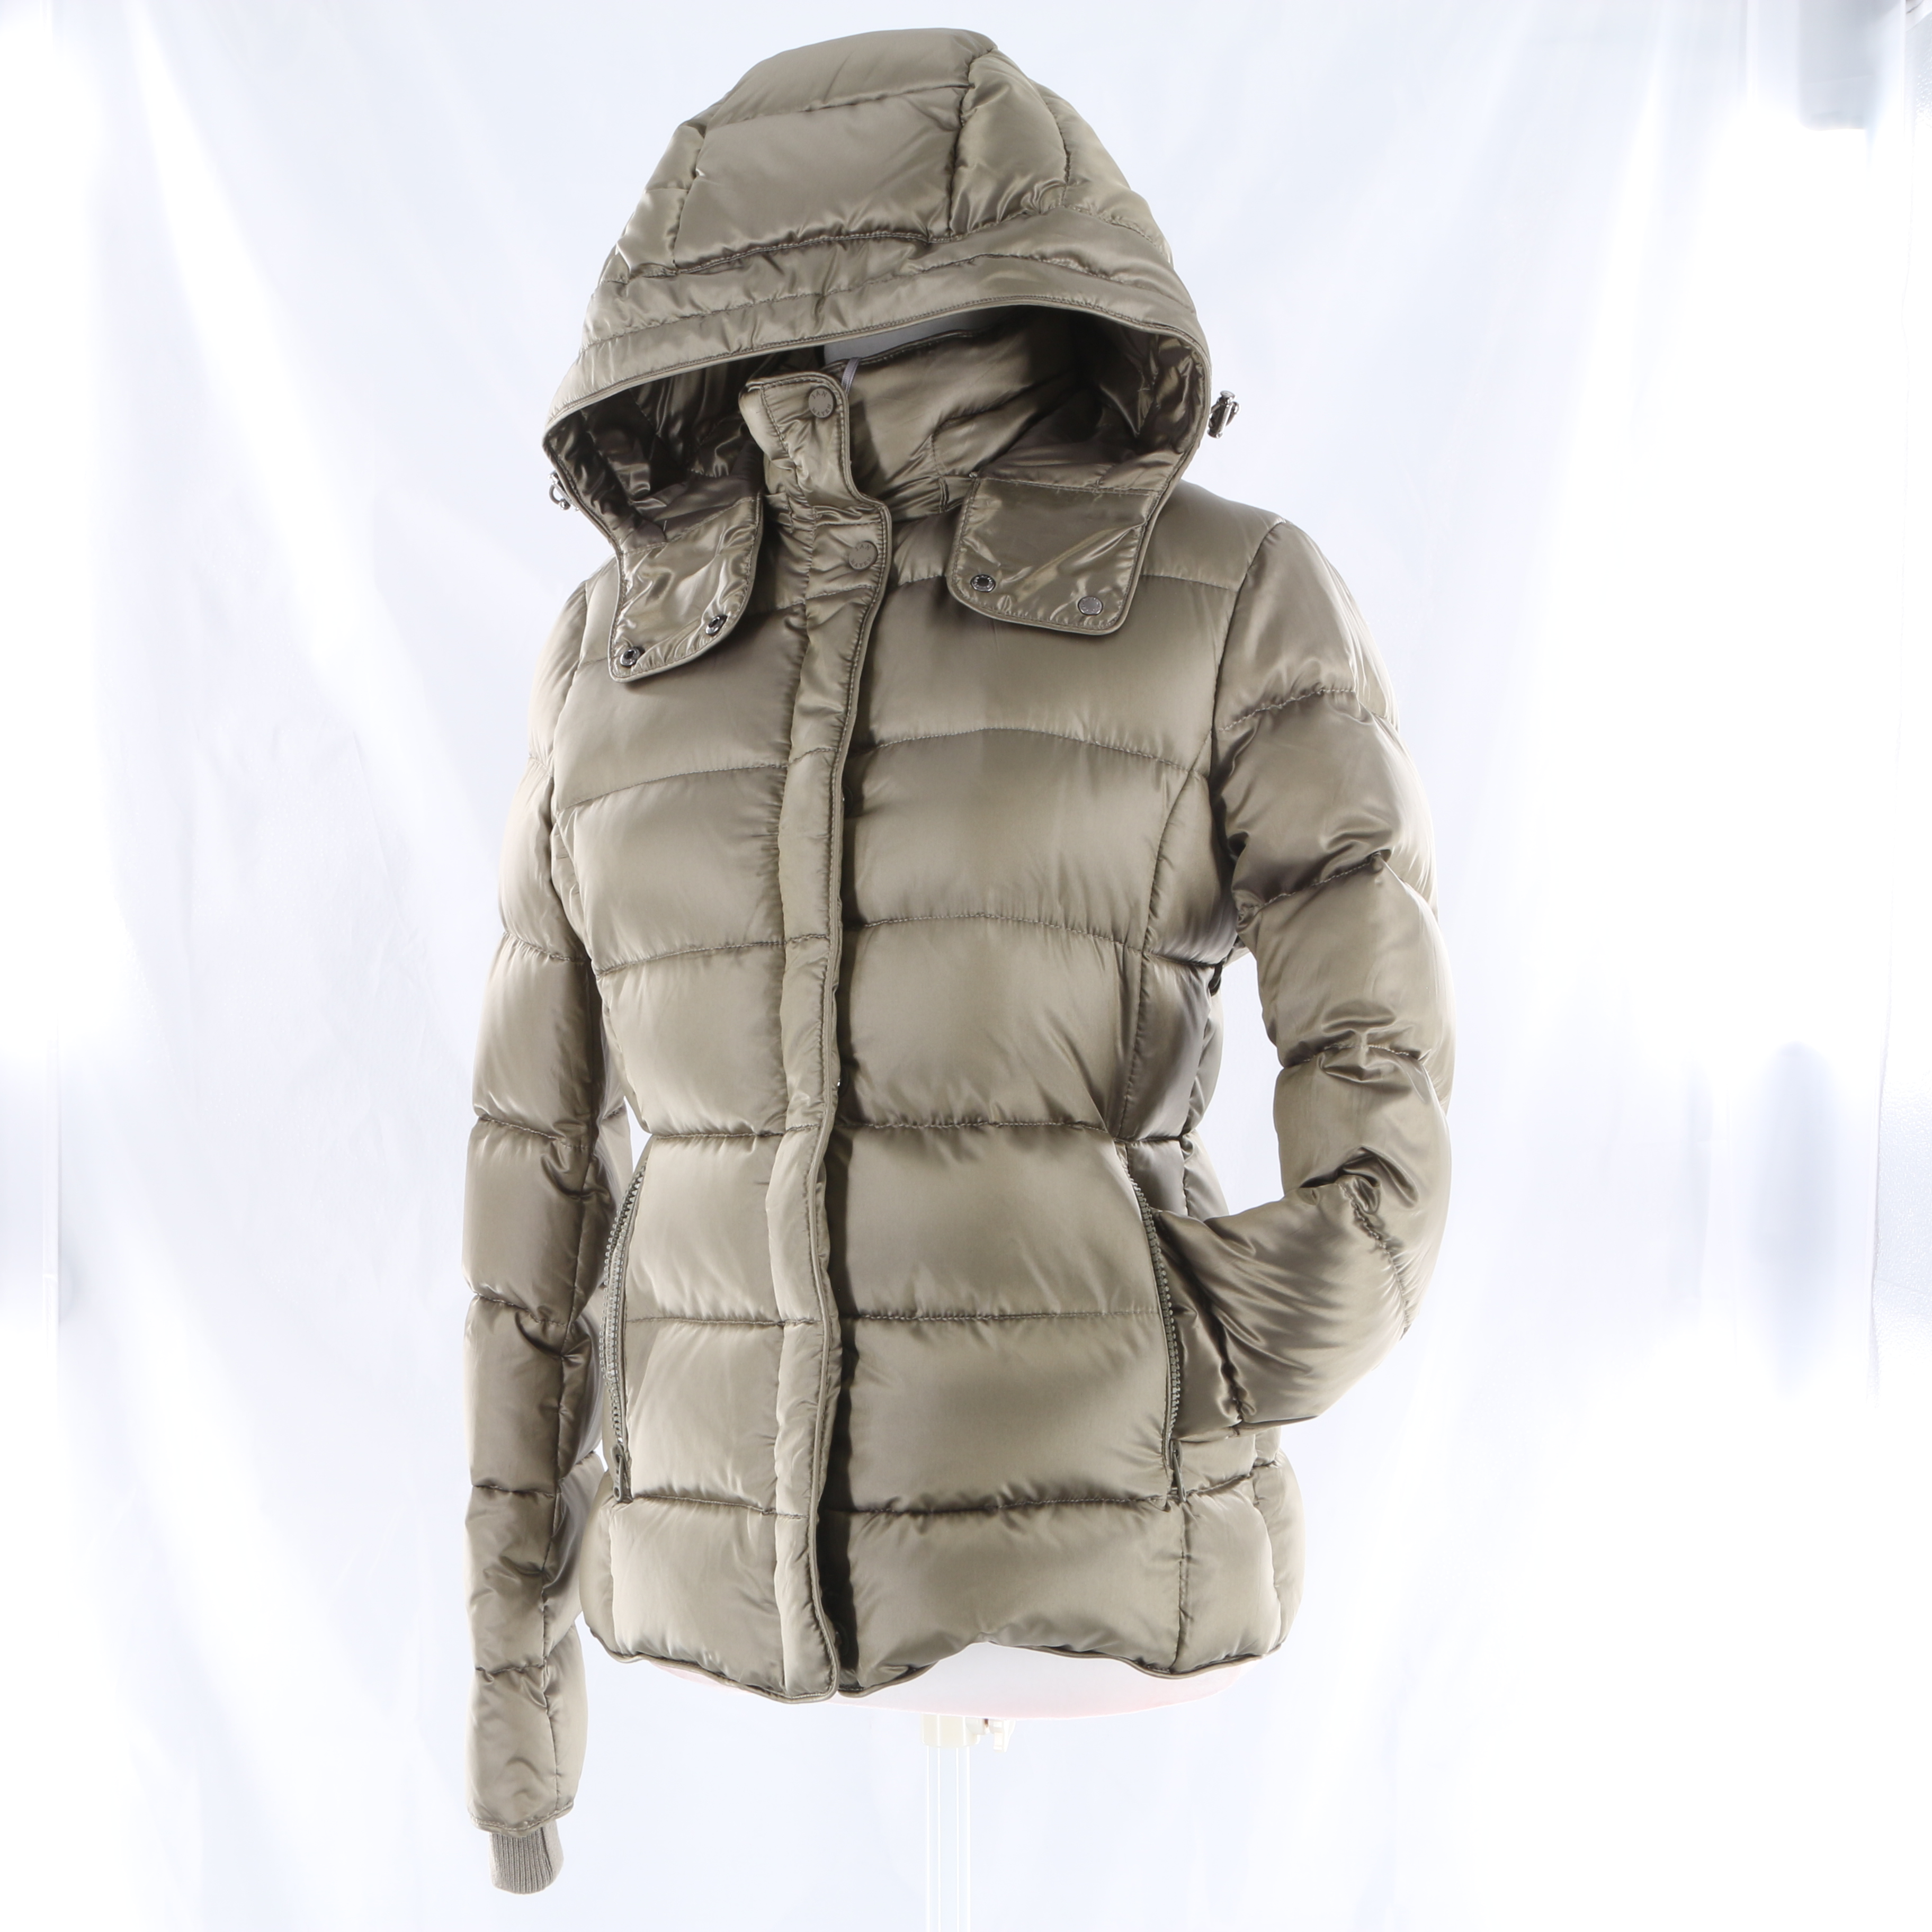 JAN MAYEN Quilted Women's Down Jacket - Deep Lichen Green -  SP/GHIACCIO-O-TH - M Couture